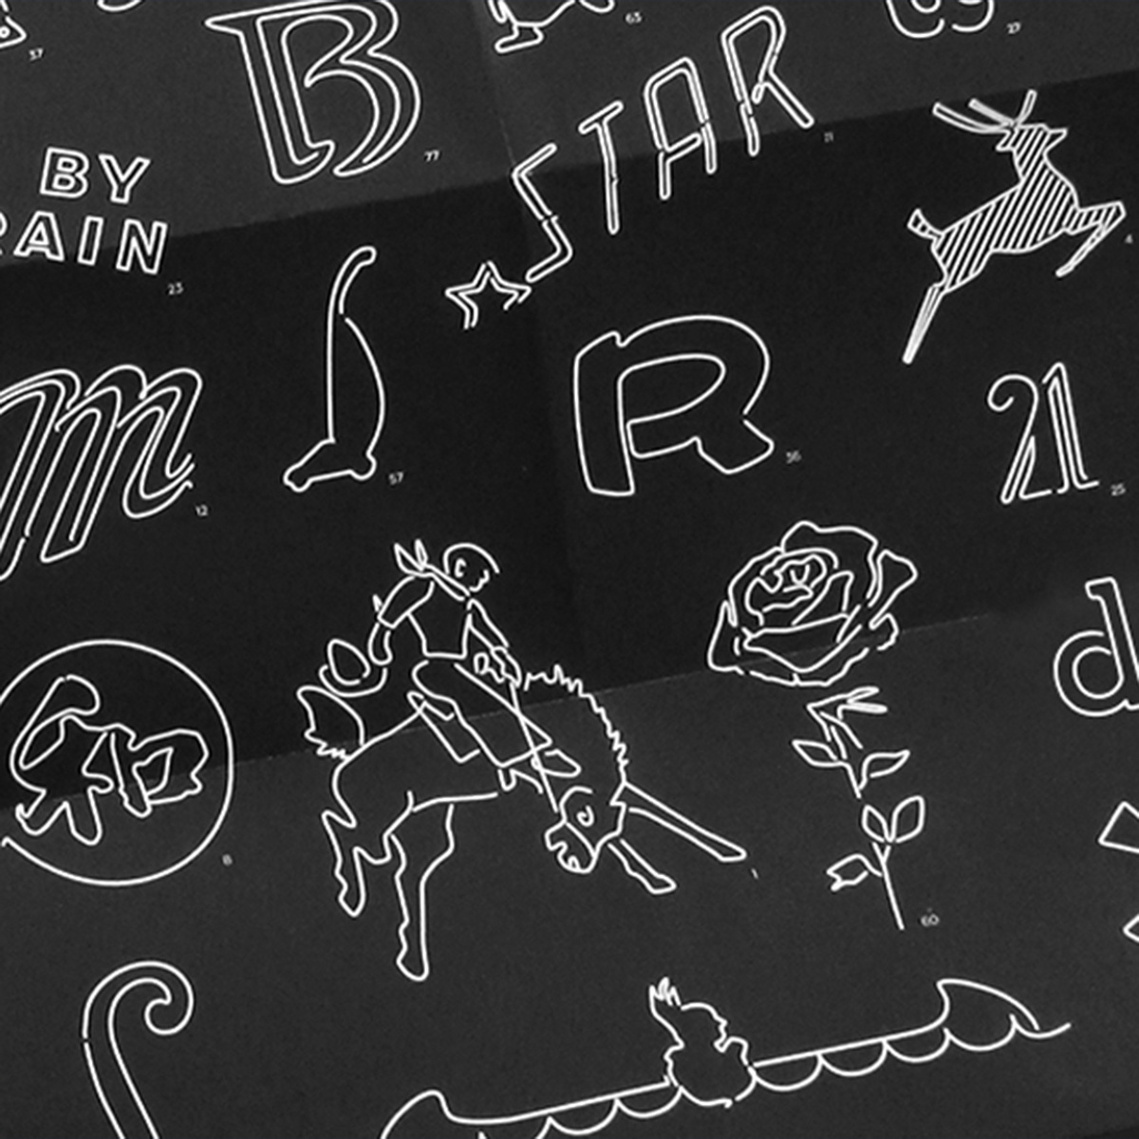 A closeup of the map and poster of Portland Oregon's best neon signs, with white neon designs of a vacuum cleaner, white stag, rose, cowboy on a horse, and letter and number designs on a black background.